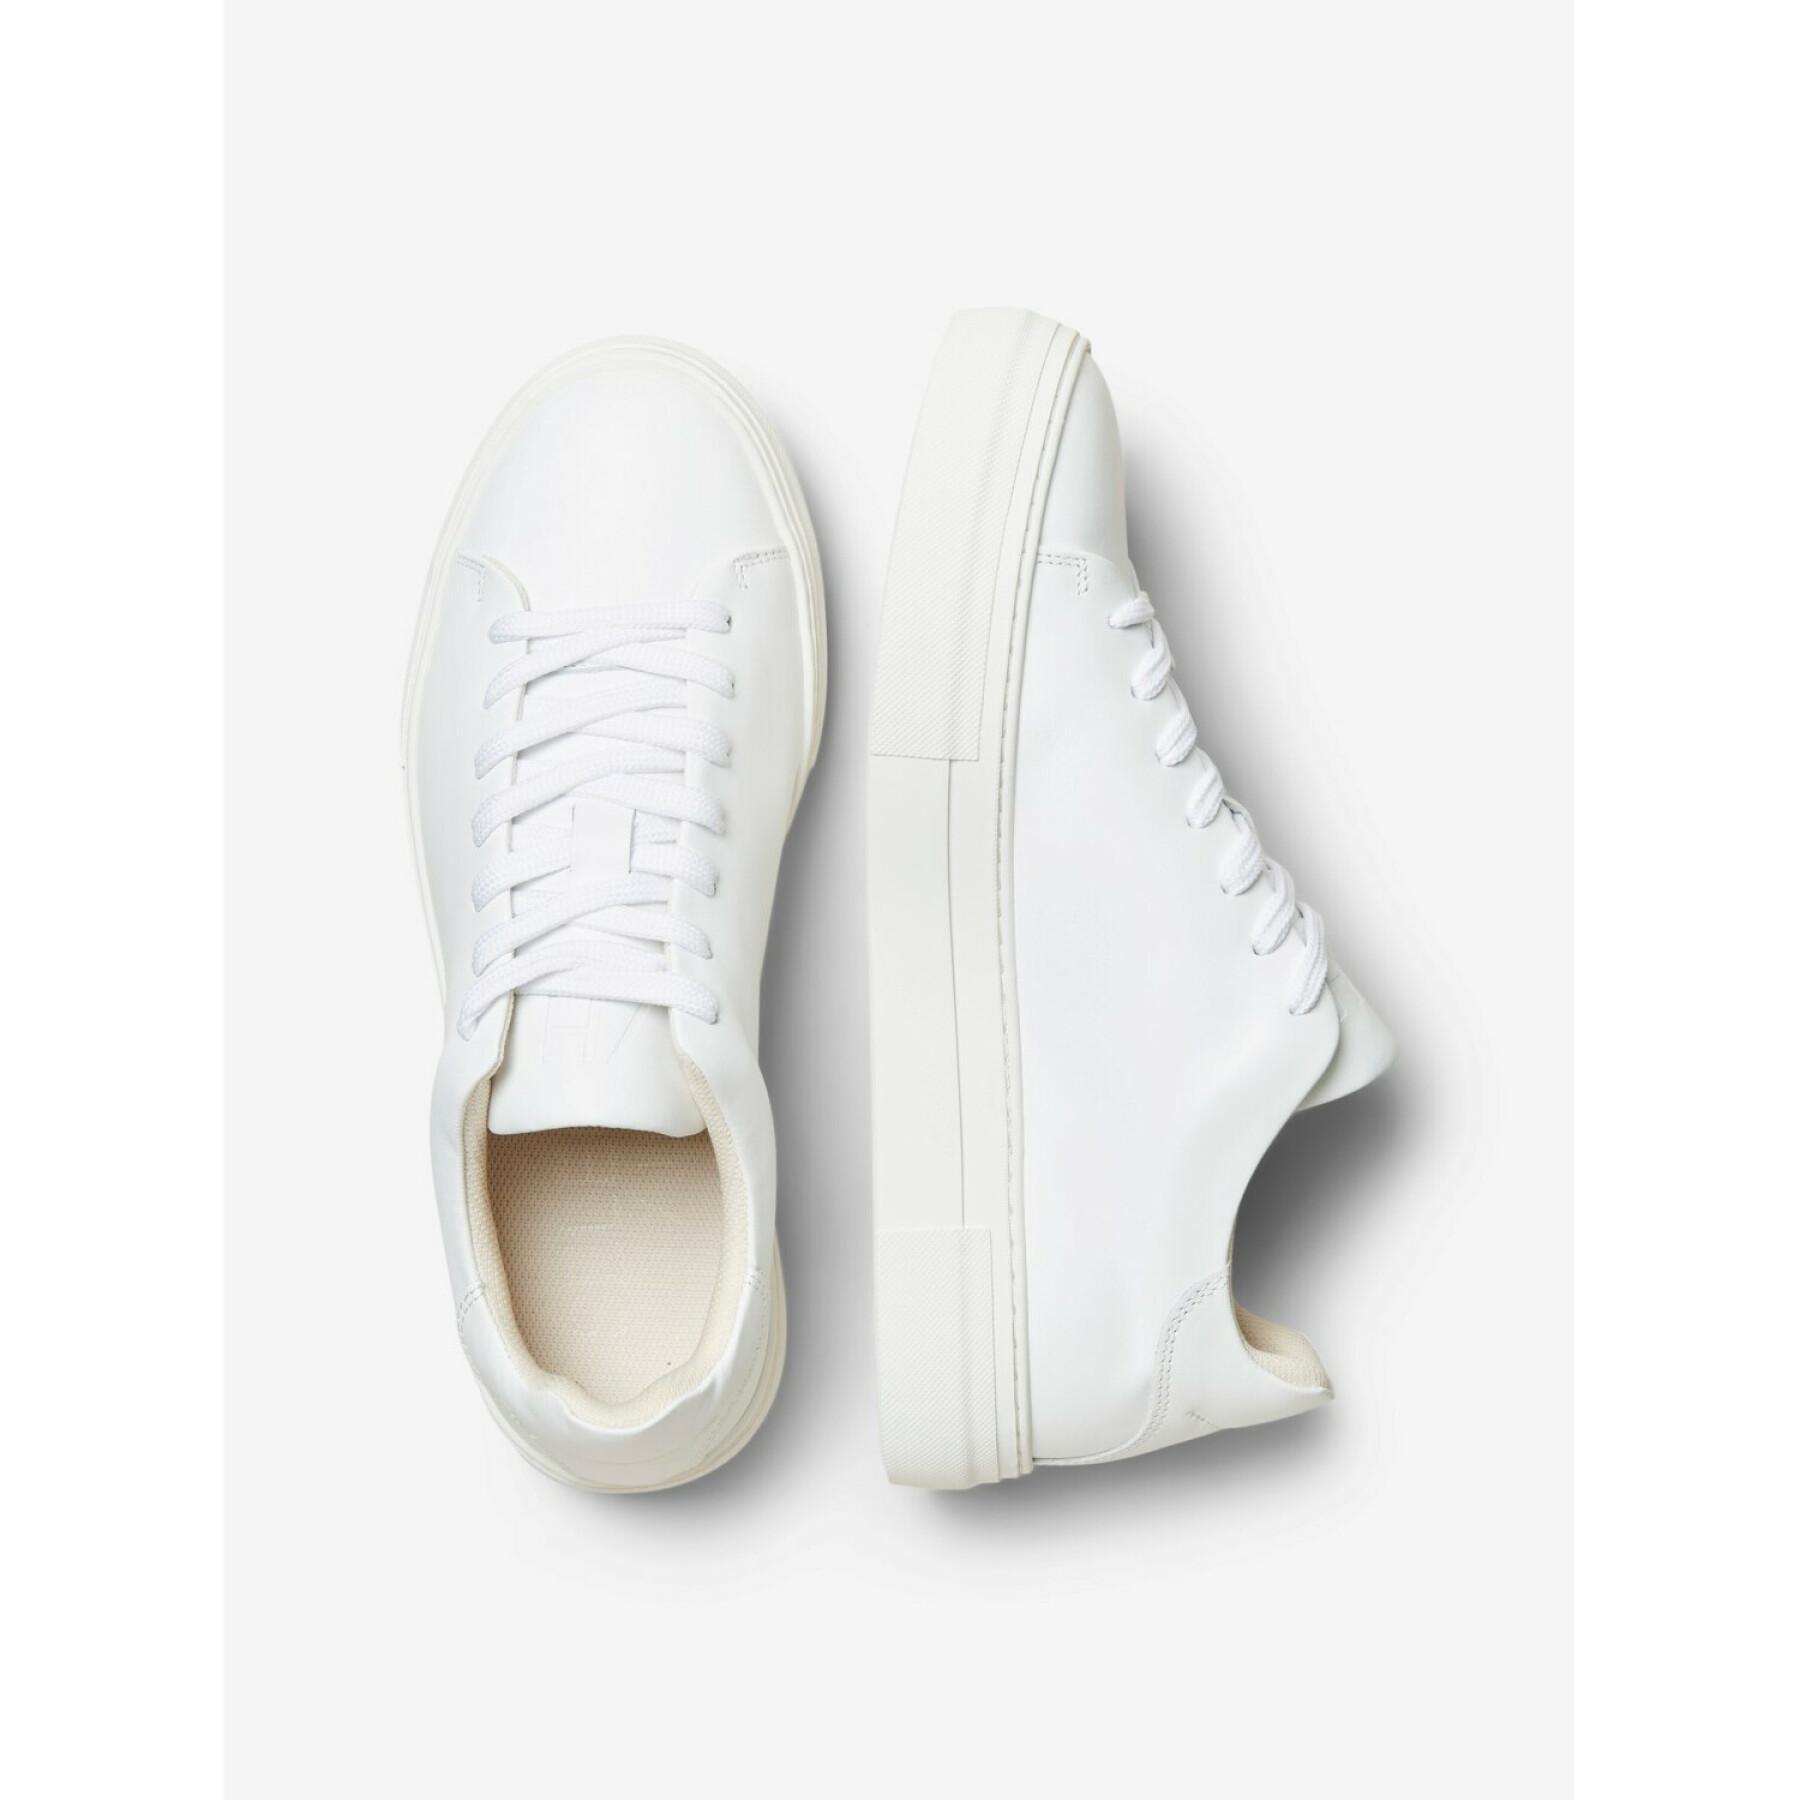 Shoes Selected David chunky leather trainer